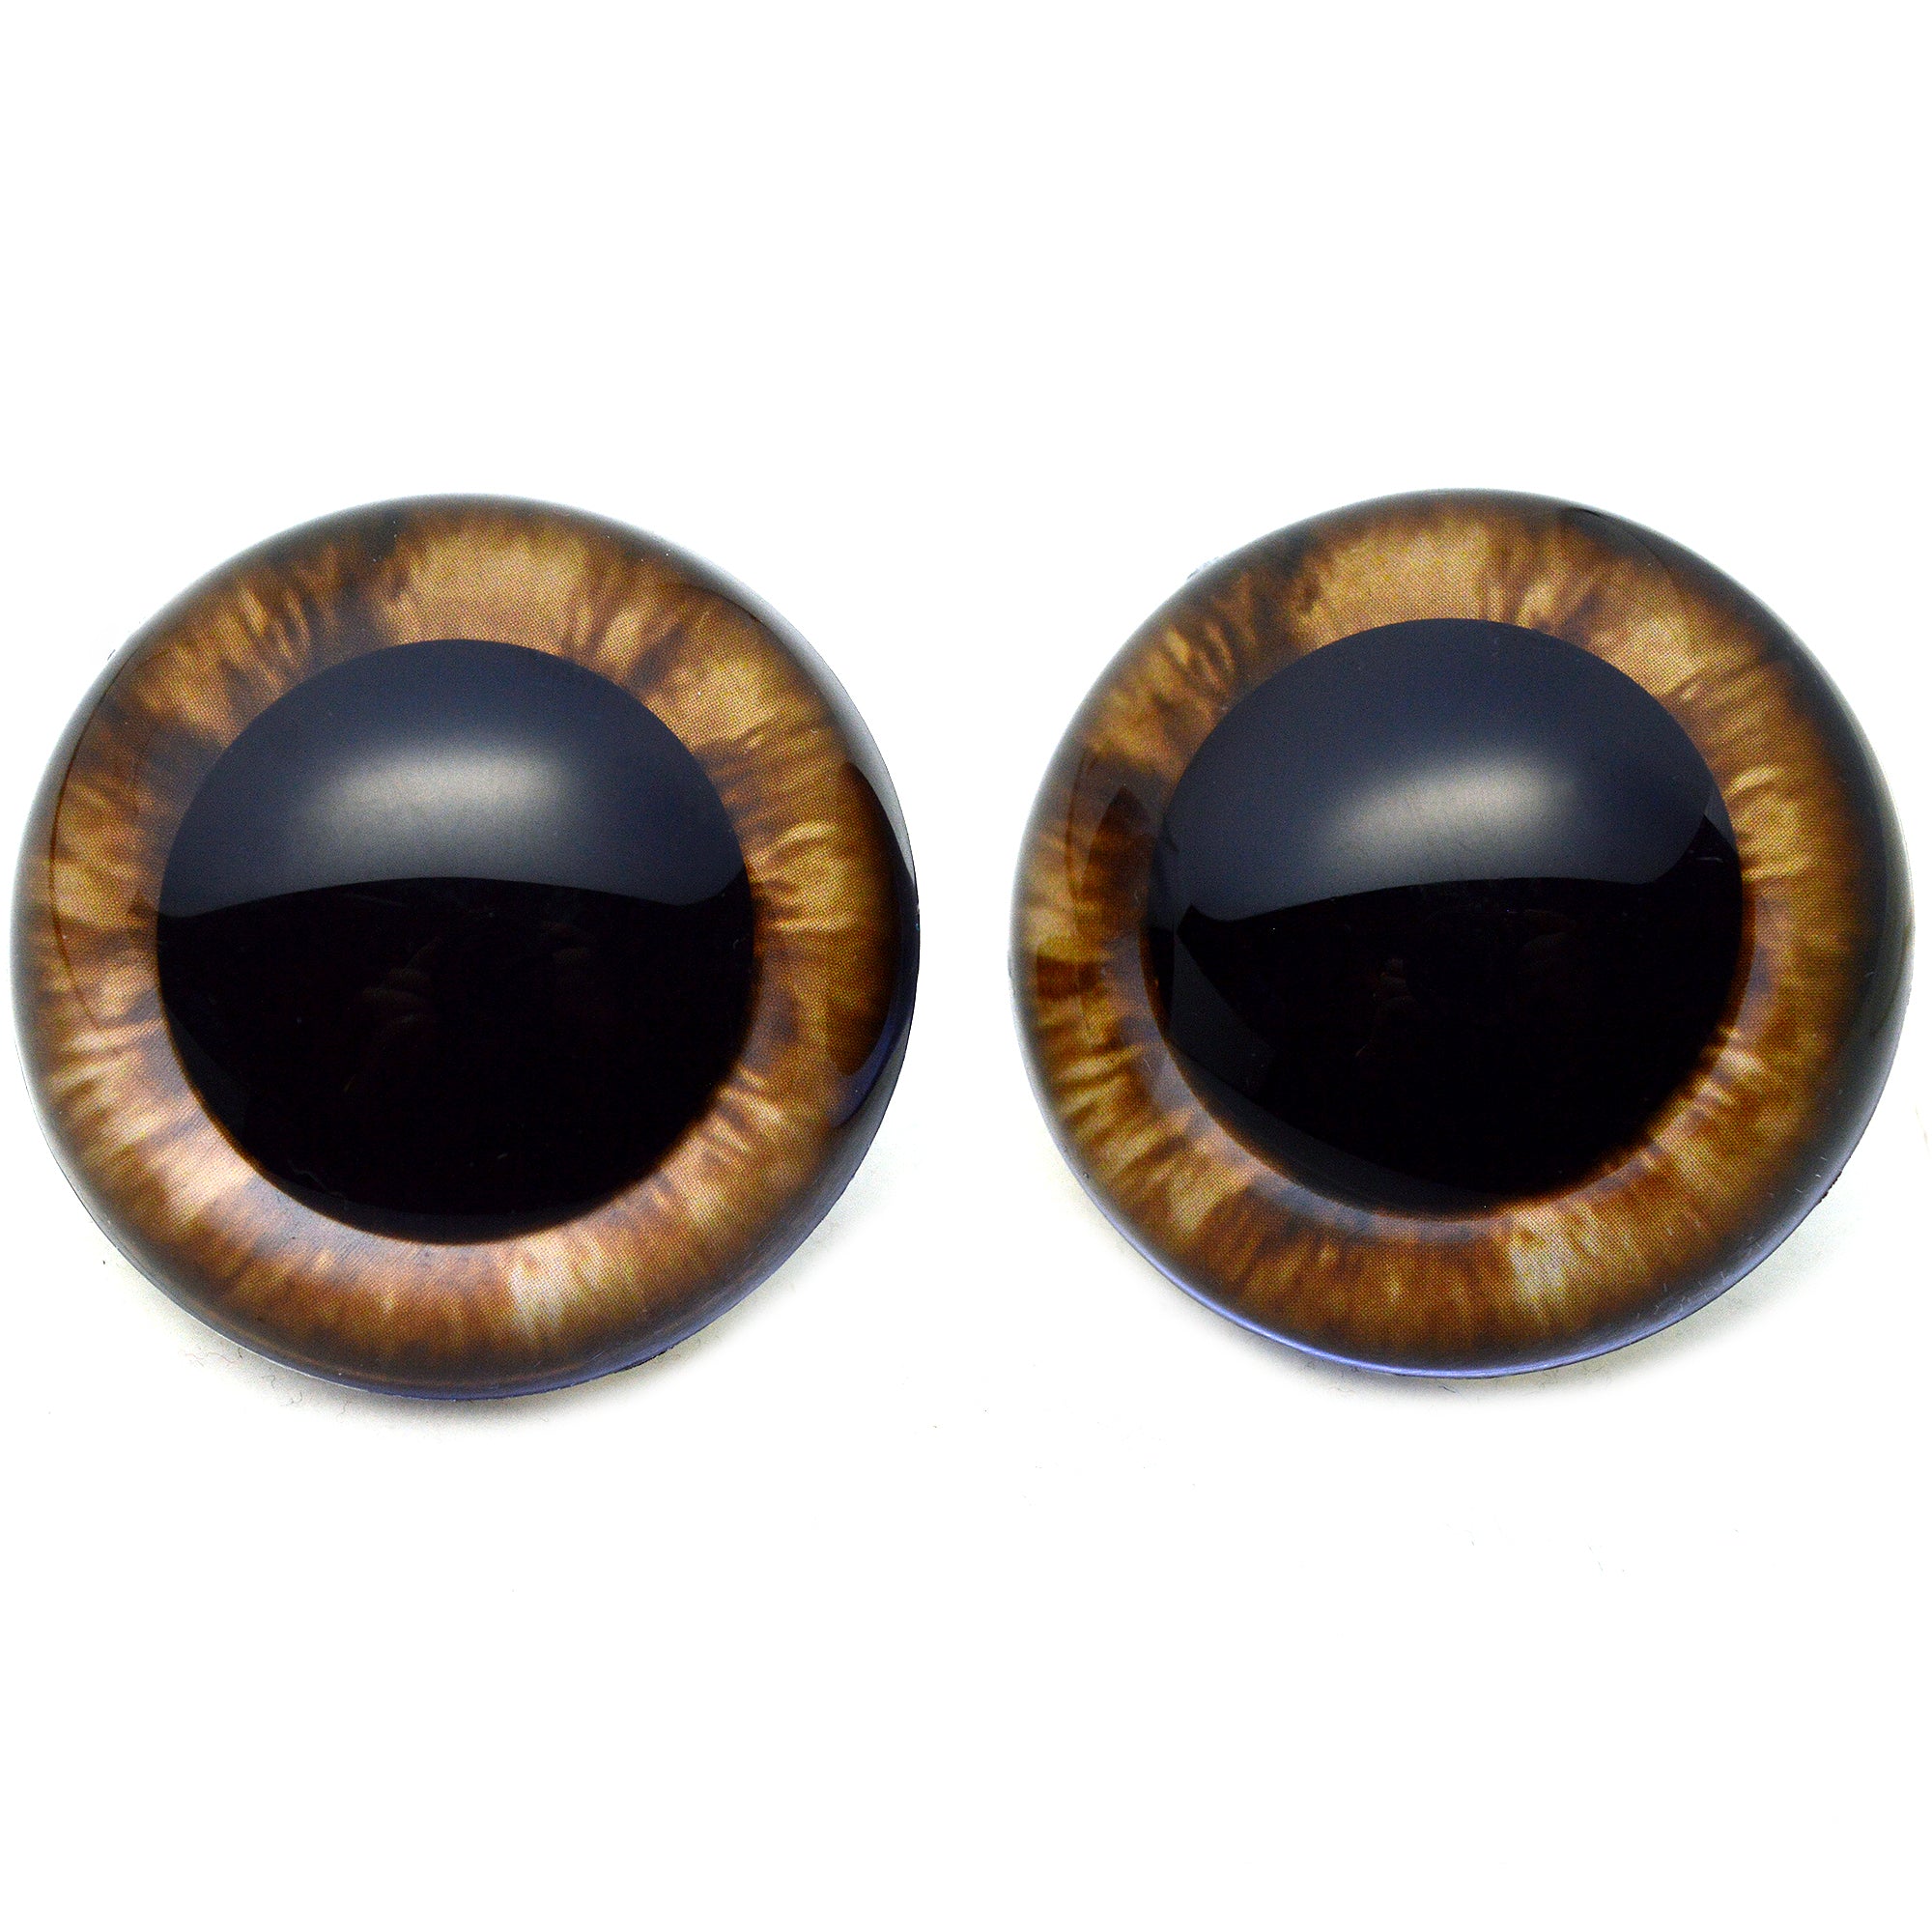 1 PAIR of Brown Plastic Safety Eyes for Teddy and Memory Bears